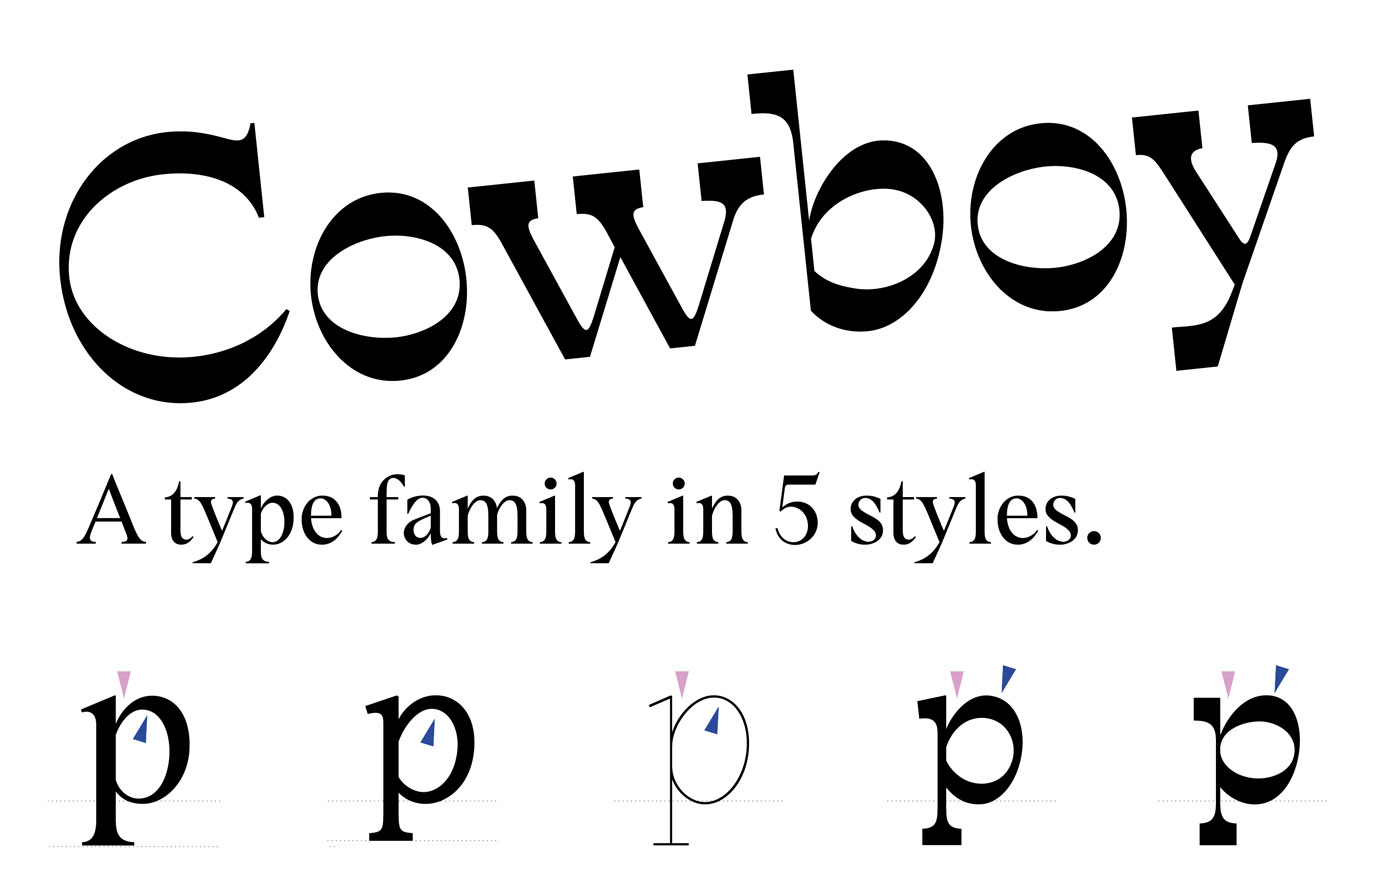 Cowboy Typeface by Mia Meyer